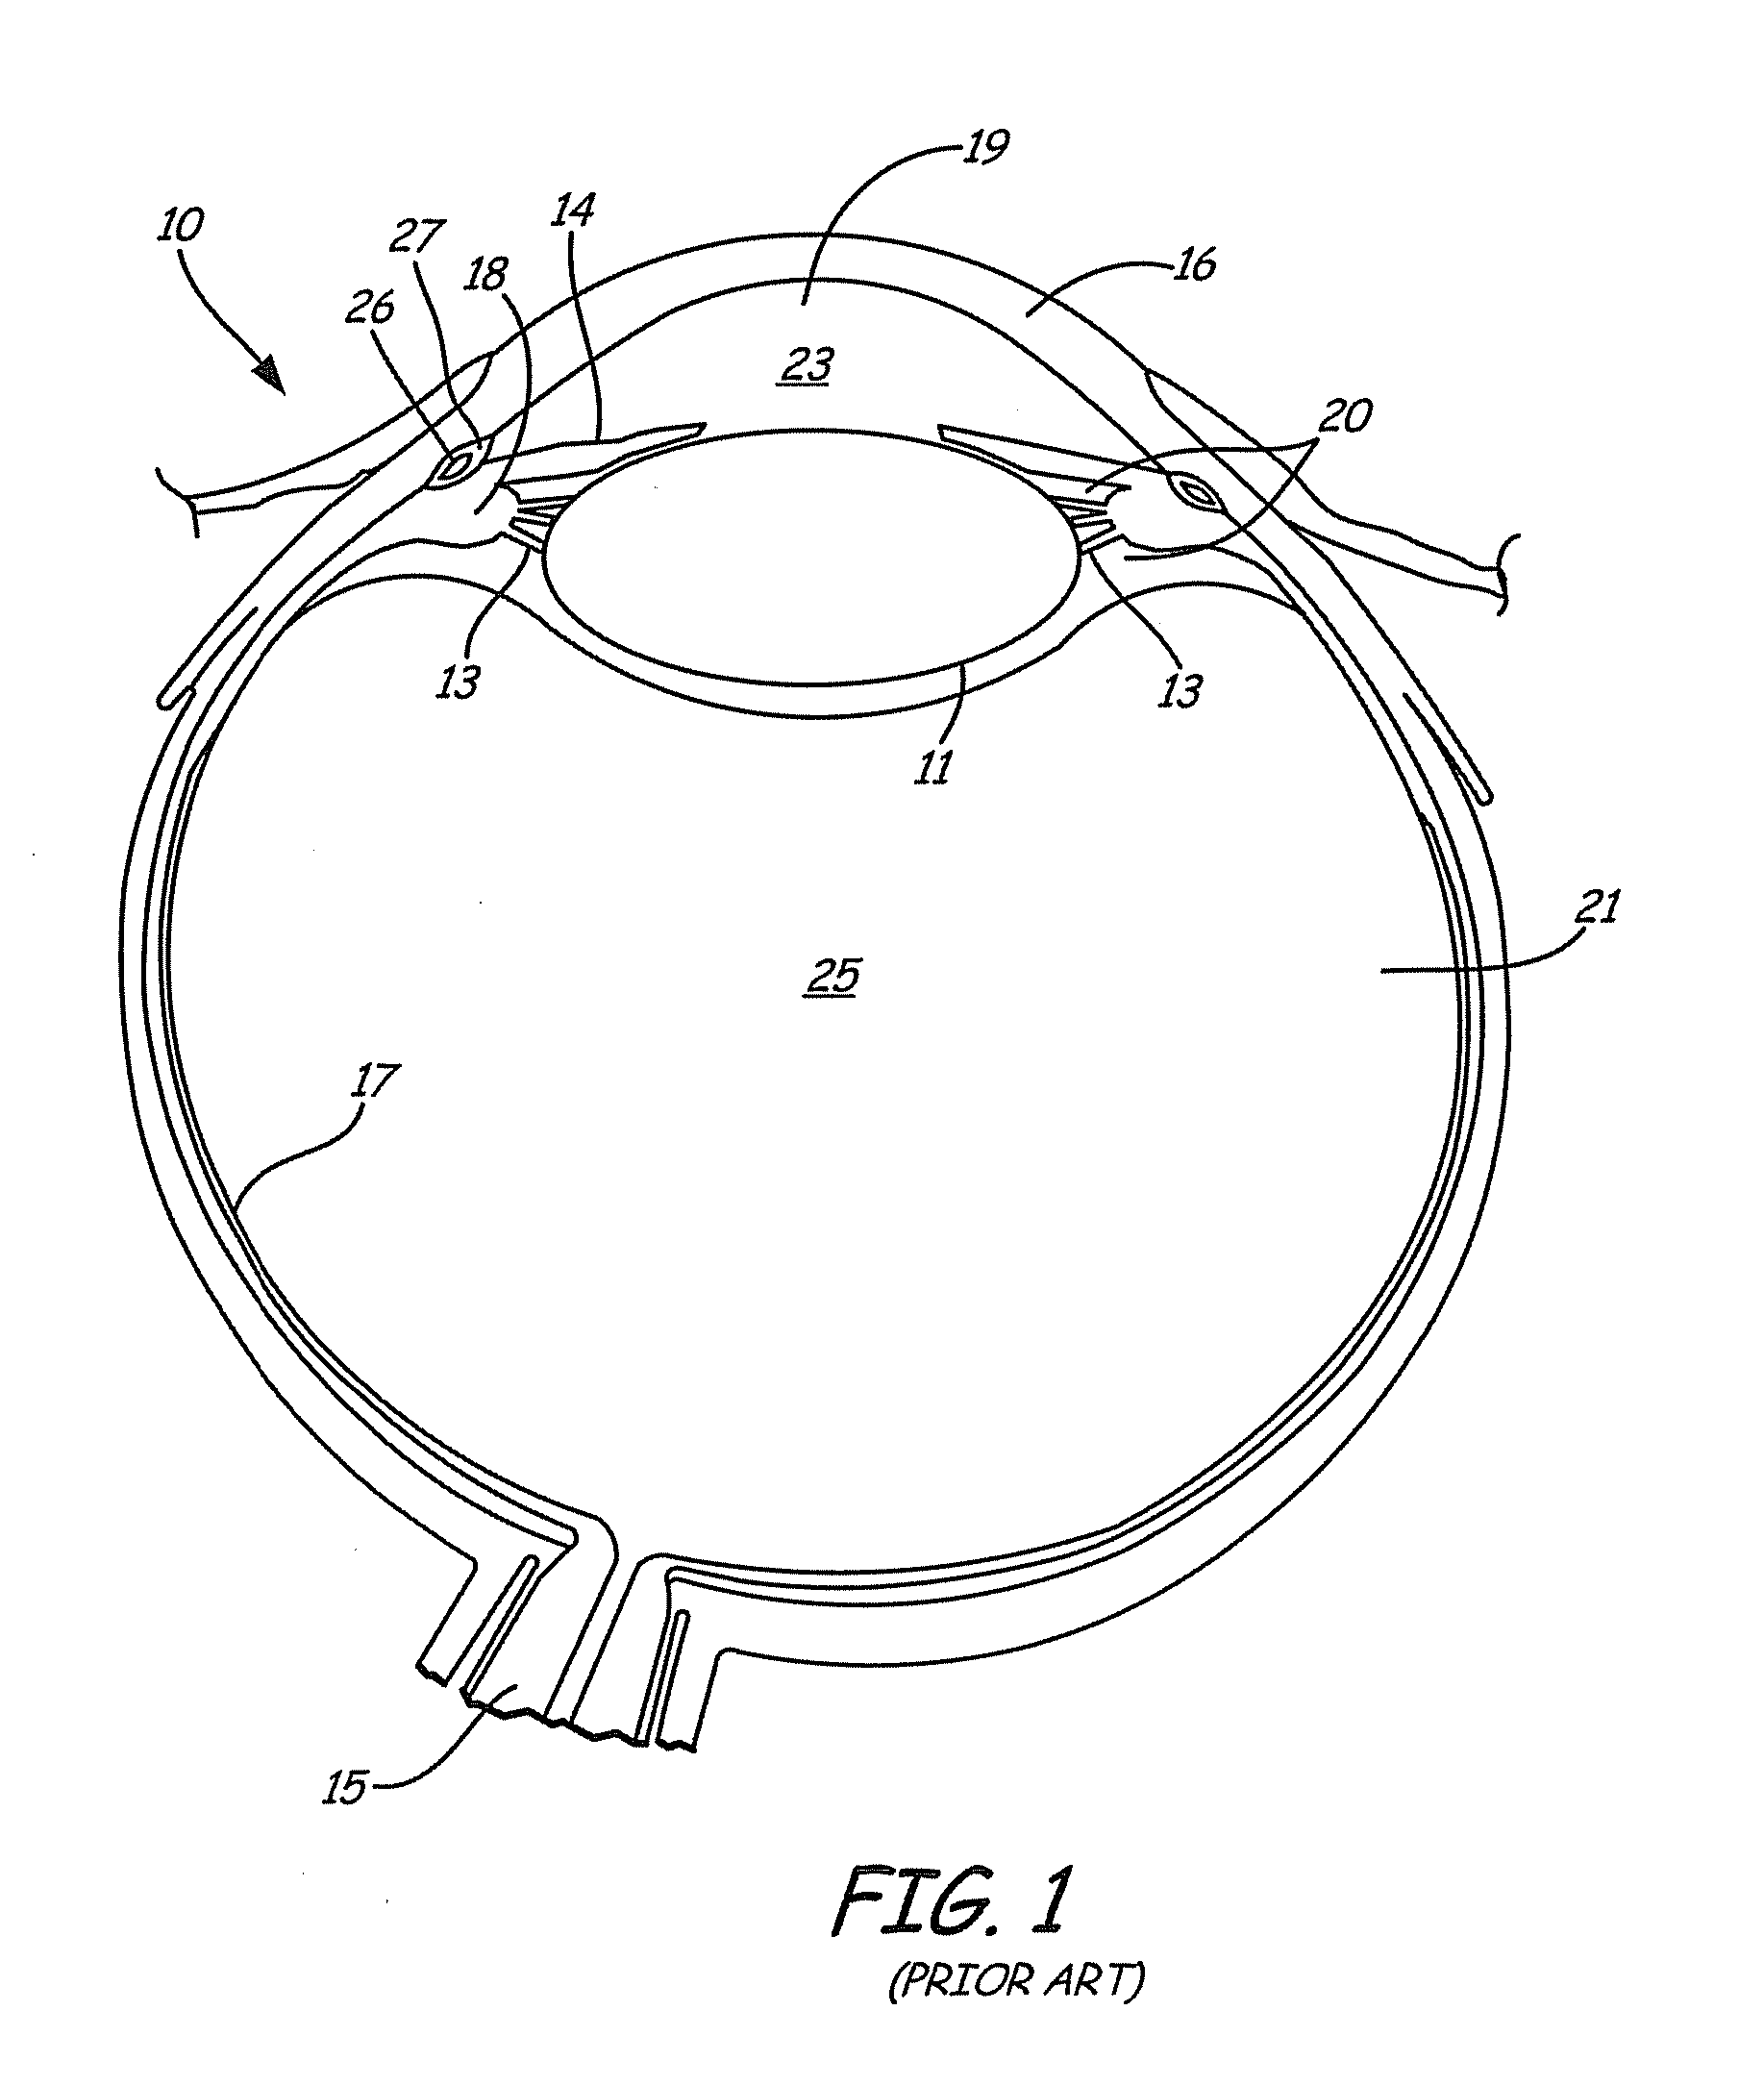 Method and apparatus for prevention and treatment of adult glaucoma